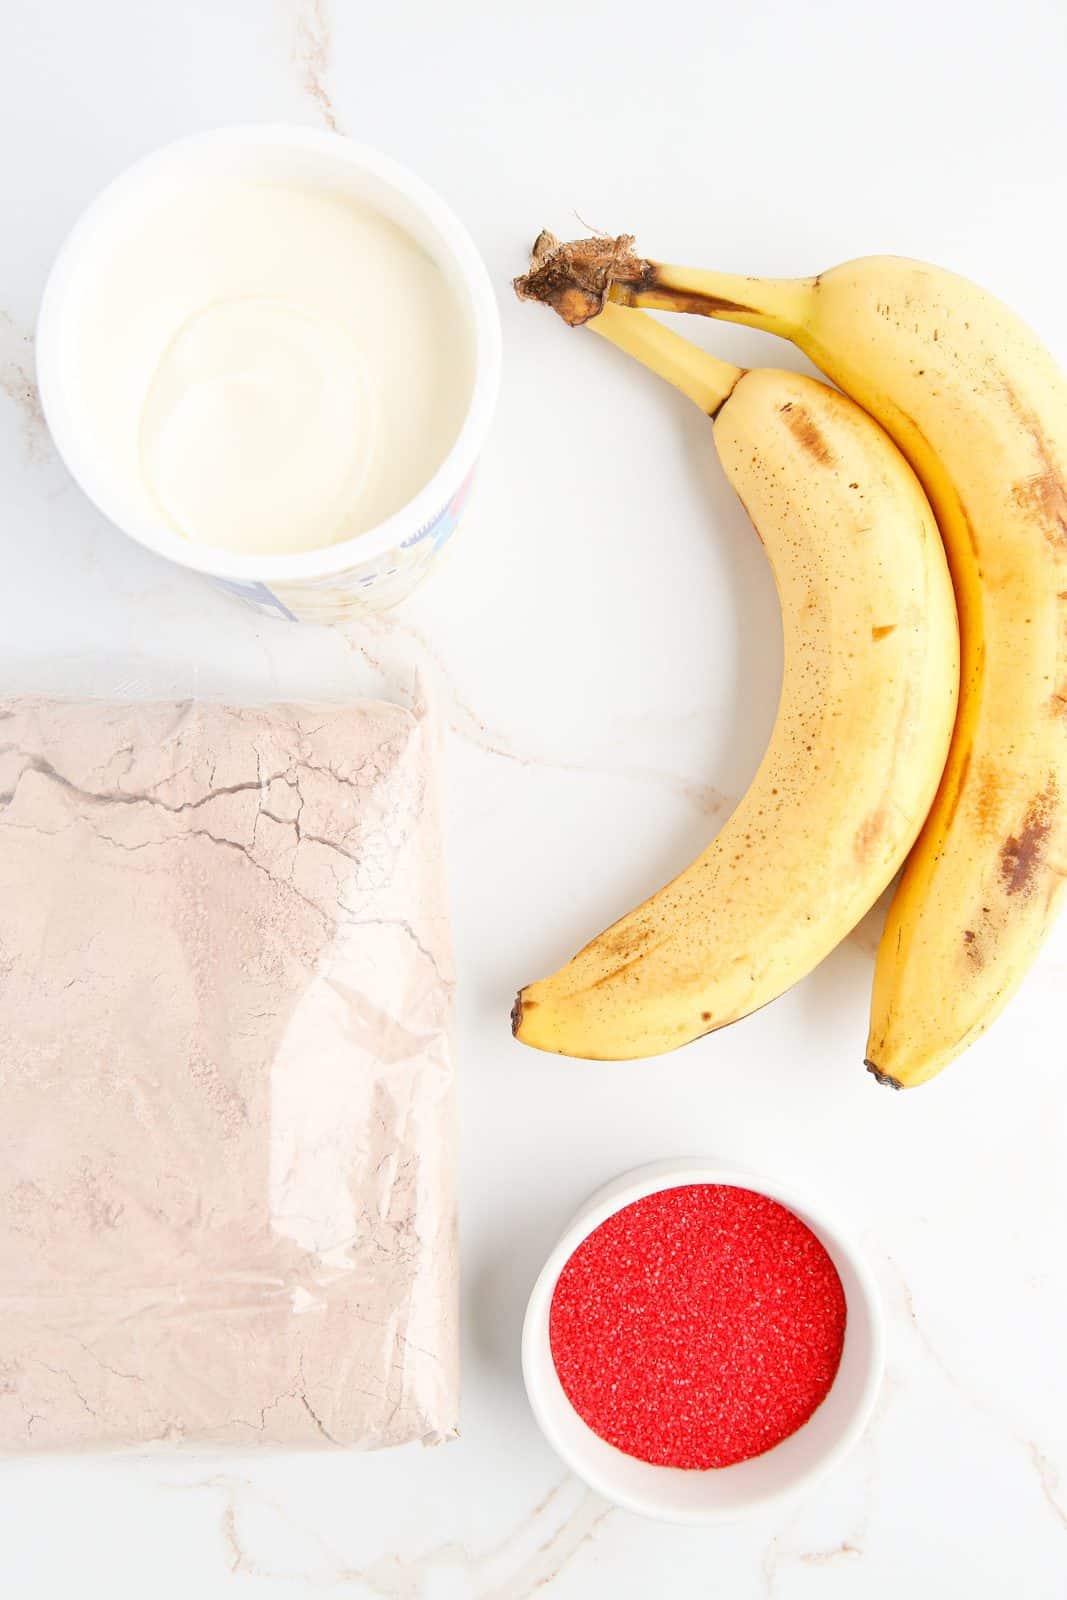 Ingredients needed: red velvet cake mix, bananas, cream cheese frosting and red sugar sprinkles.